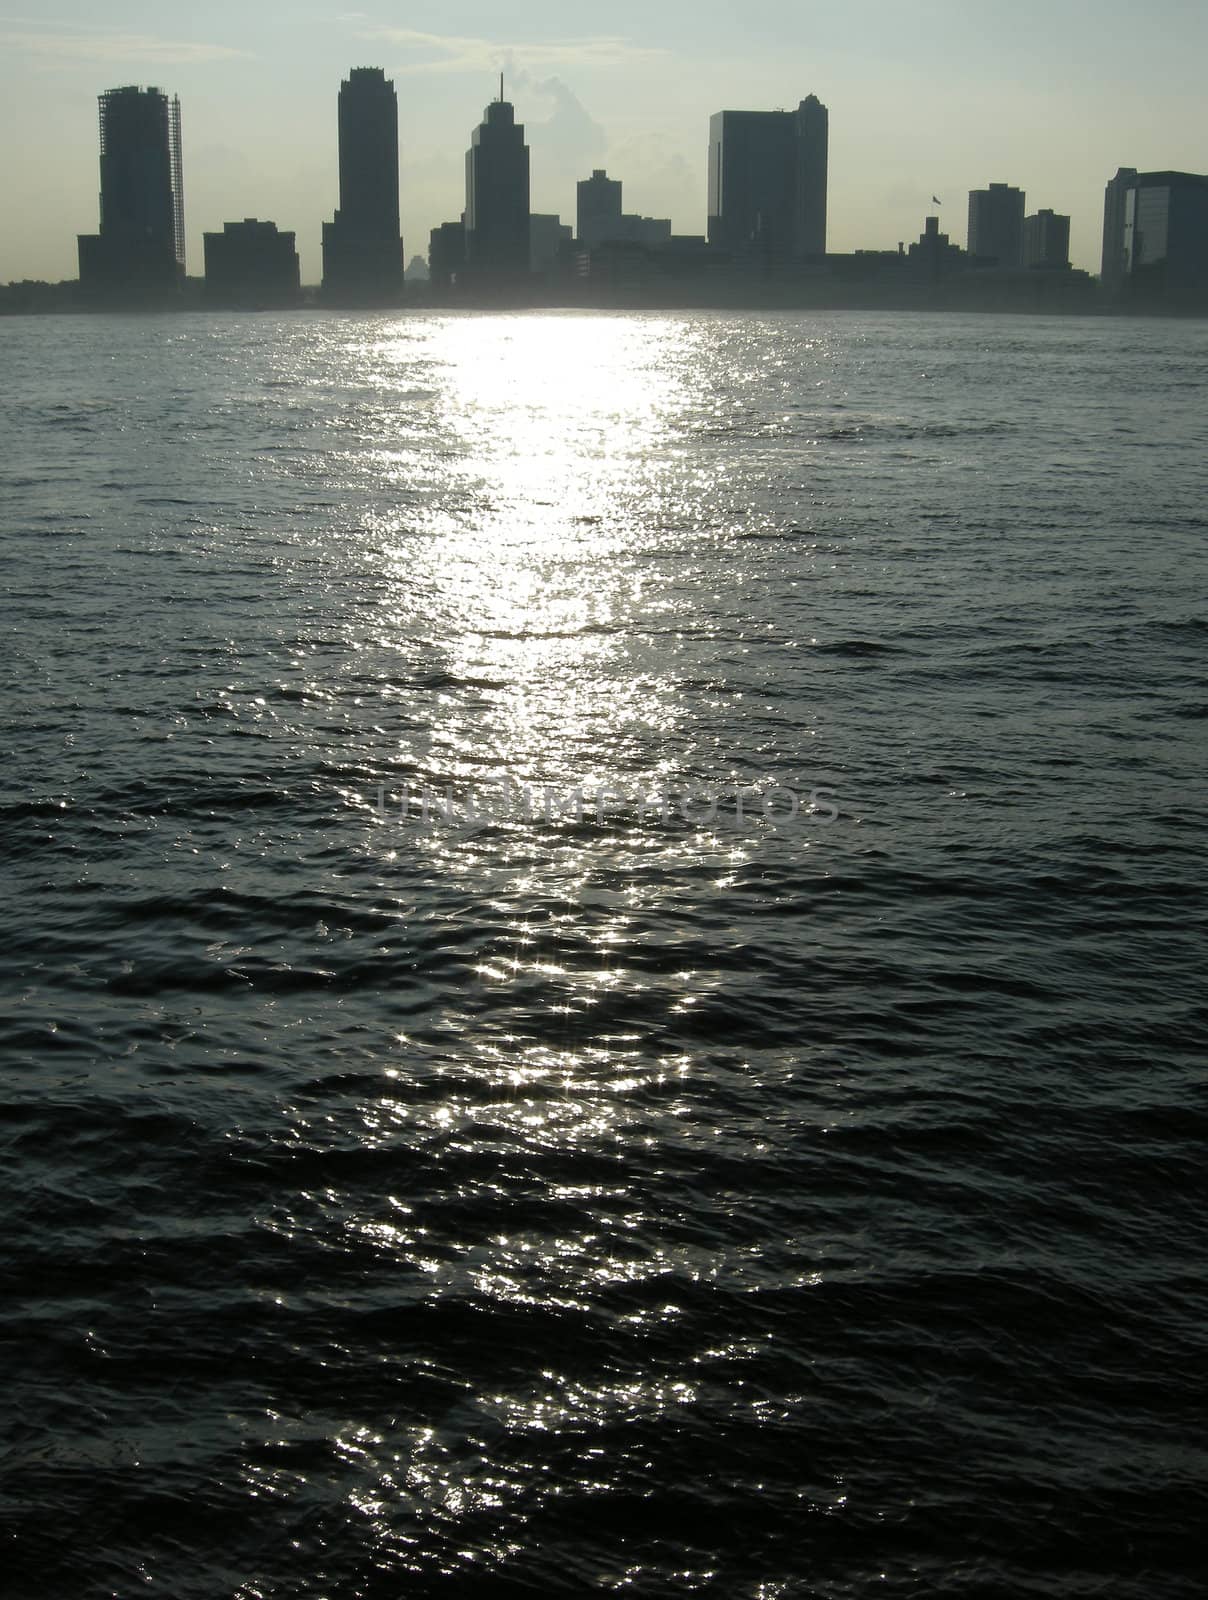 Jersey City skyscrapers silhouettes, photo taken from Manhattan